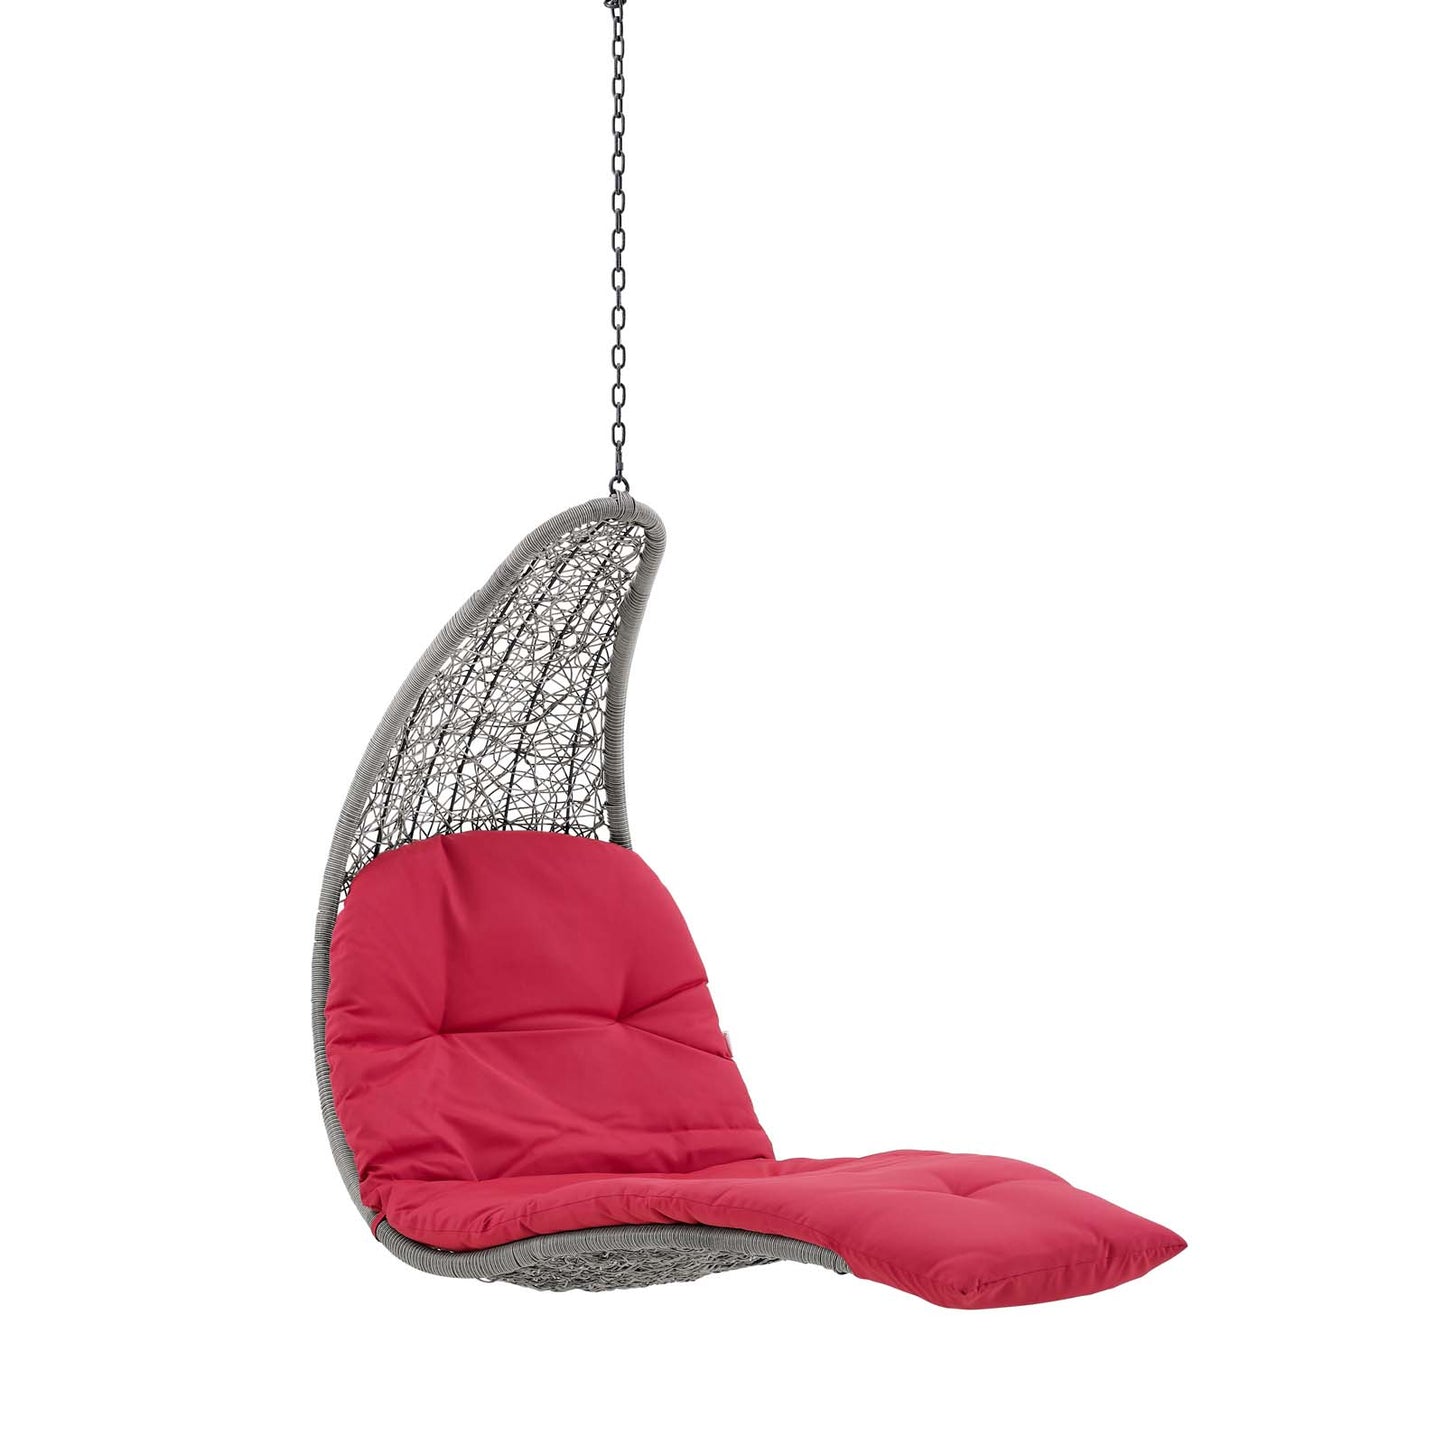 Landscape Hanging Chaise Lounge Outdoor Patio Swing Chair Light Gray Red EEI-4589-LGR-RED